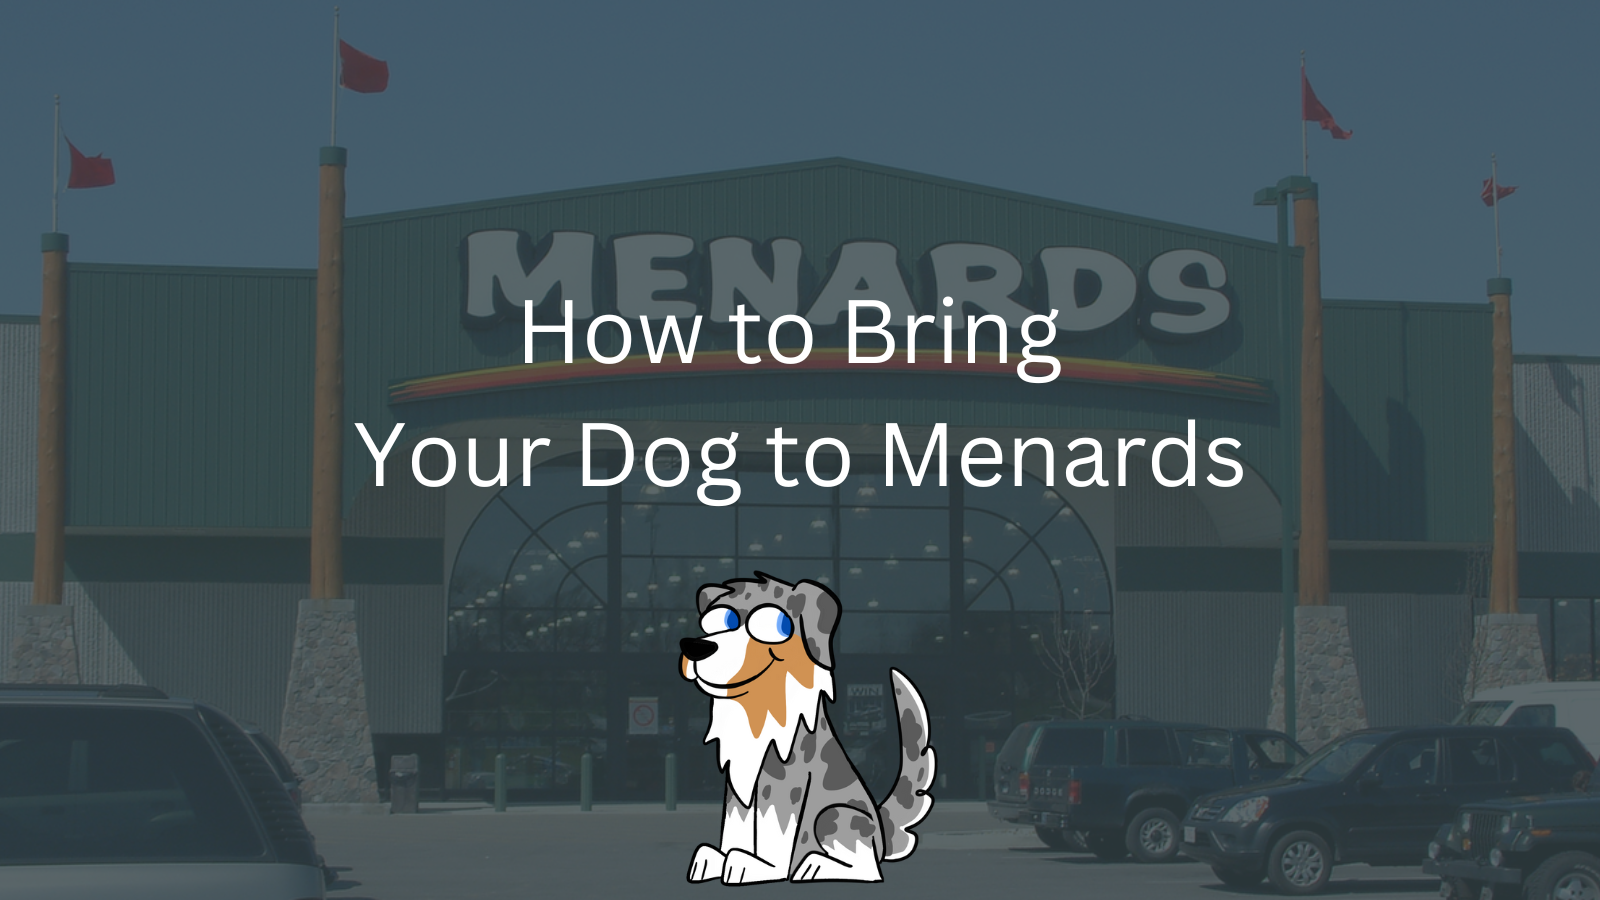 Image Text: "How to Bring Your Dog to Menards"